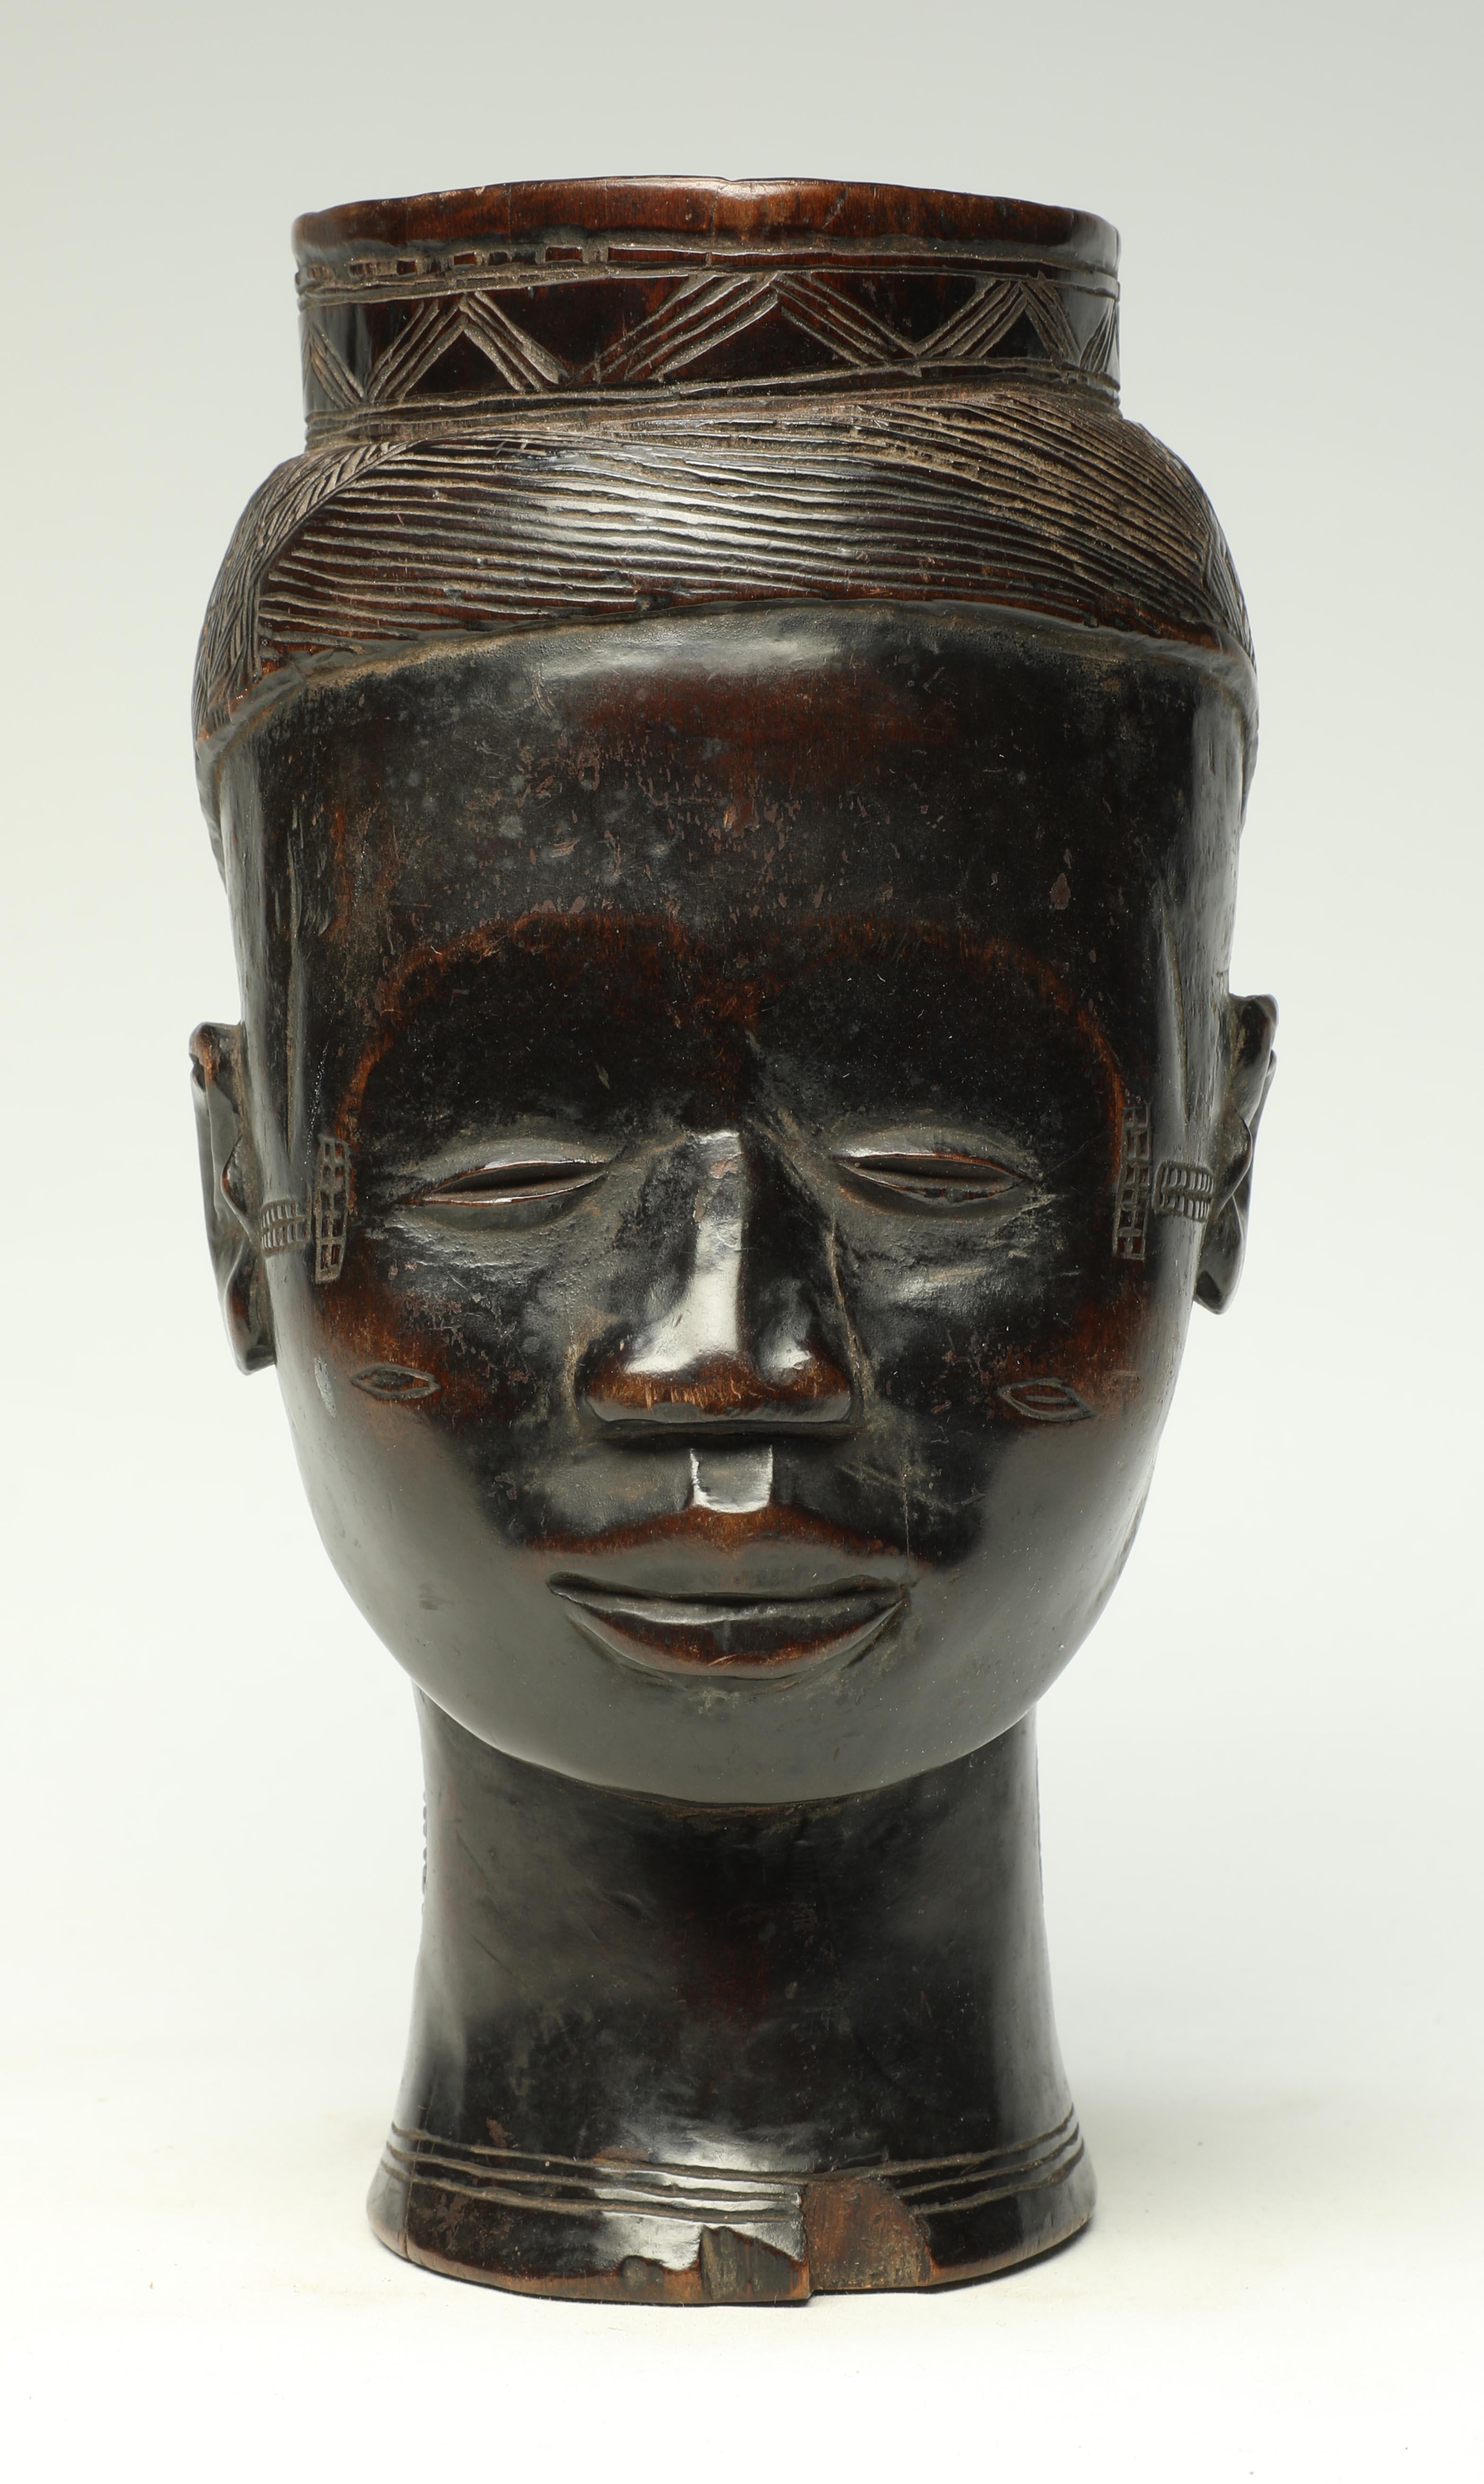 Early finely carved hard wood Kuba figural cup, Congo with rich and deep patina. In the form of a naturalistic sweet face and handle on back. Wonderful asymmetrical incised classic Kuba crisscross design for hair. Very deep patina, wear and polish